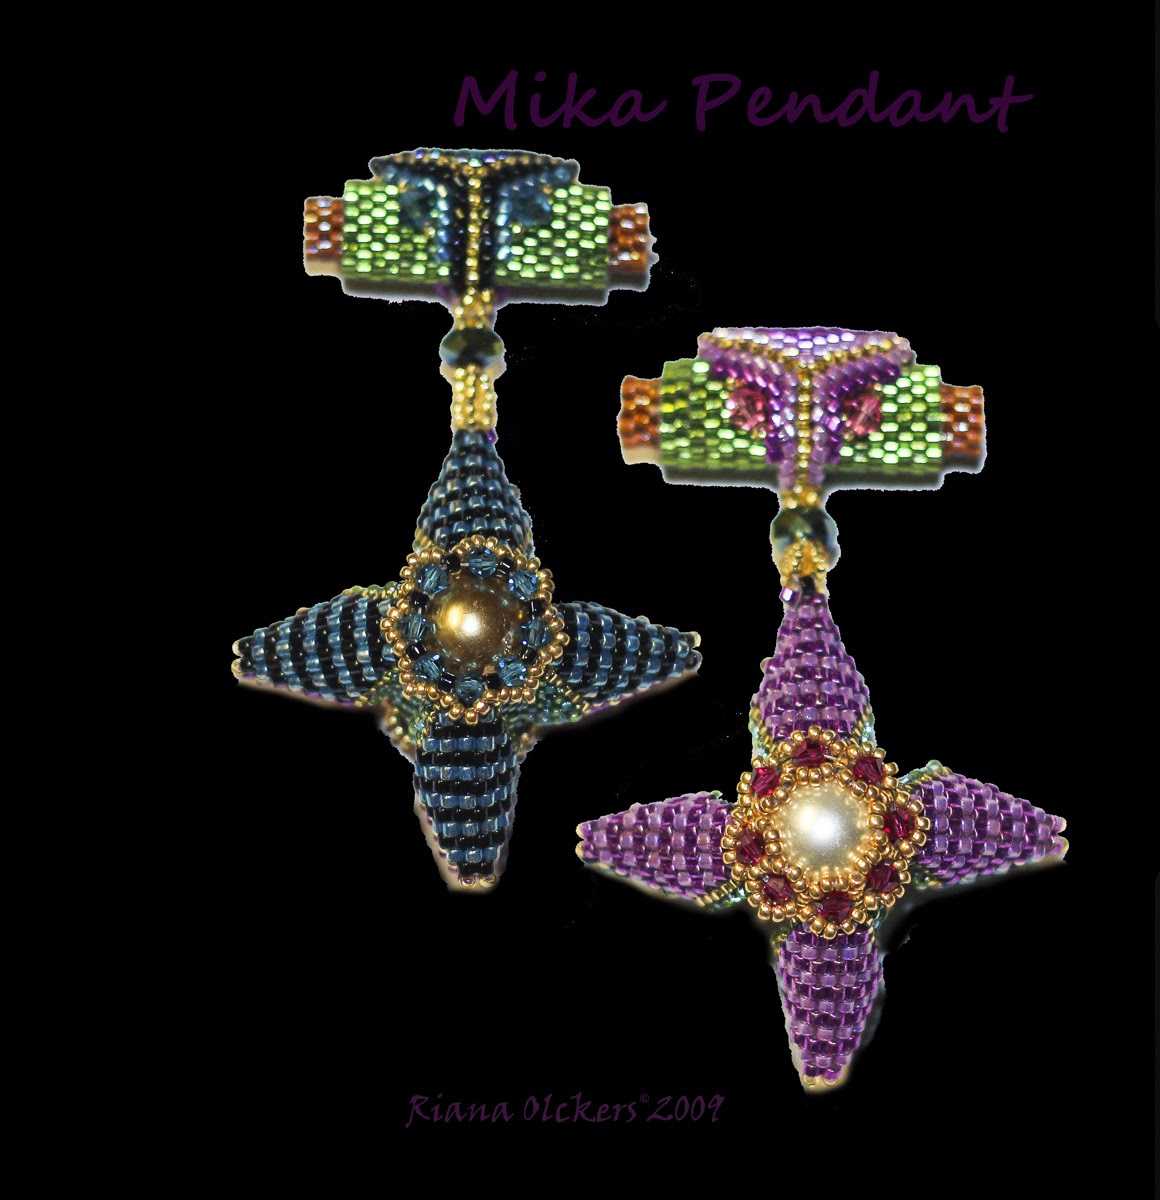 http://www.etsy.com/listing/177755126/mika-pendant-a-bead-weaving-tutorial?ref=shop_home_active_1